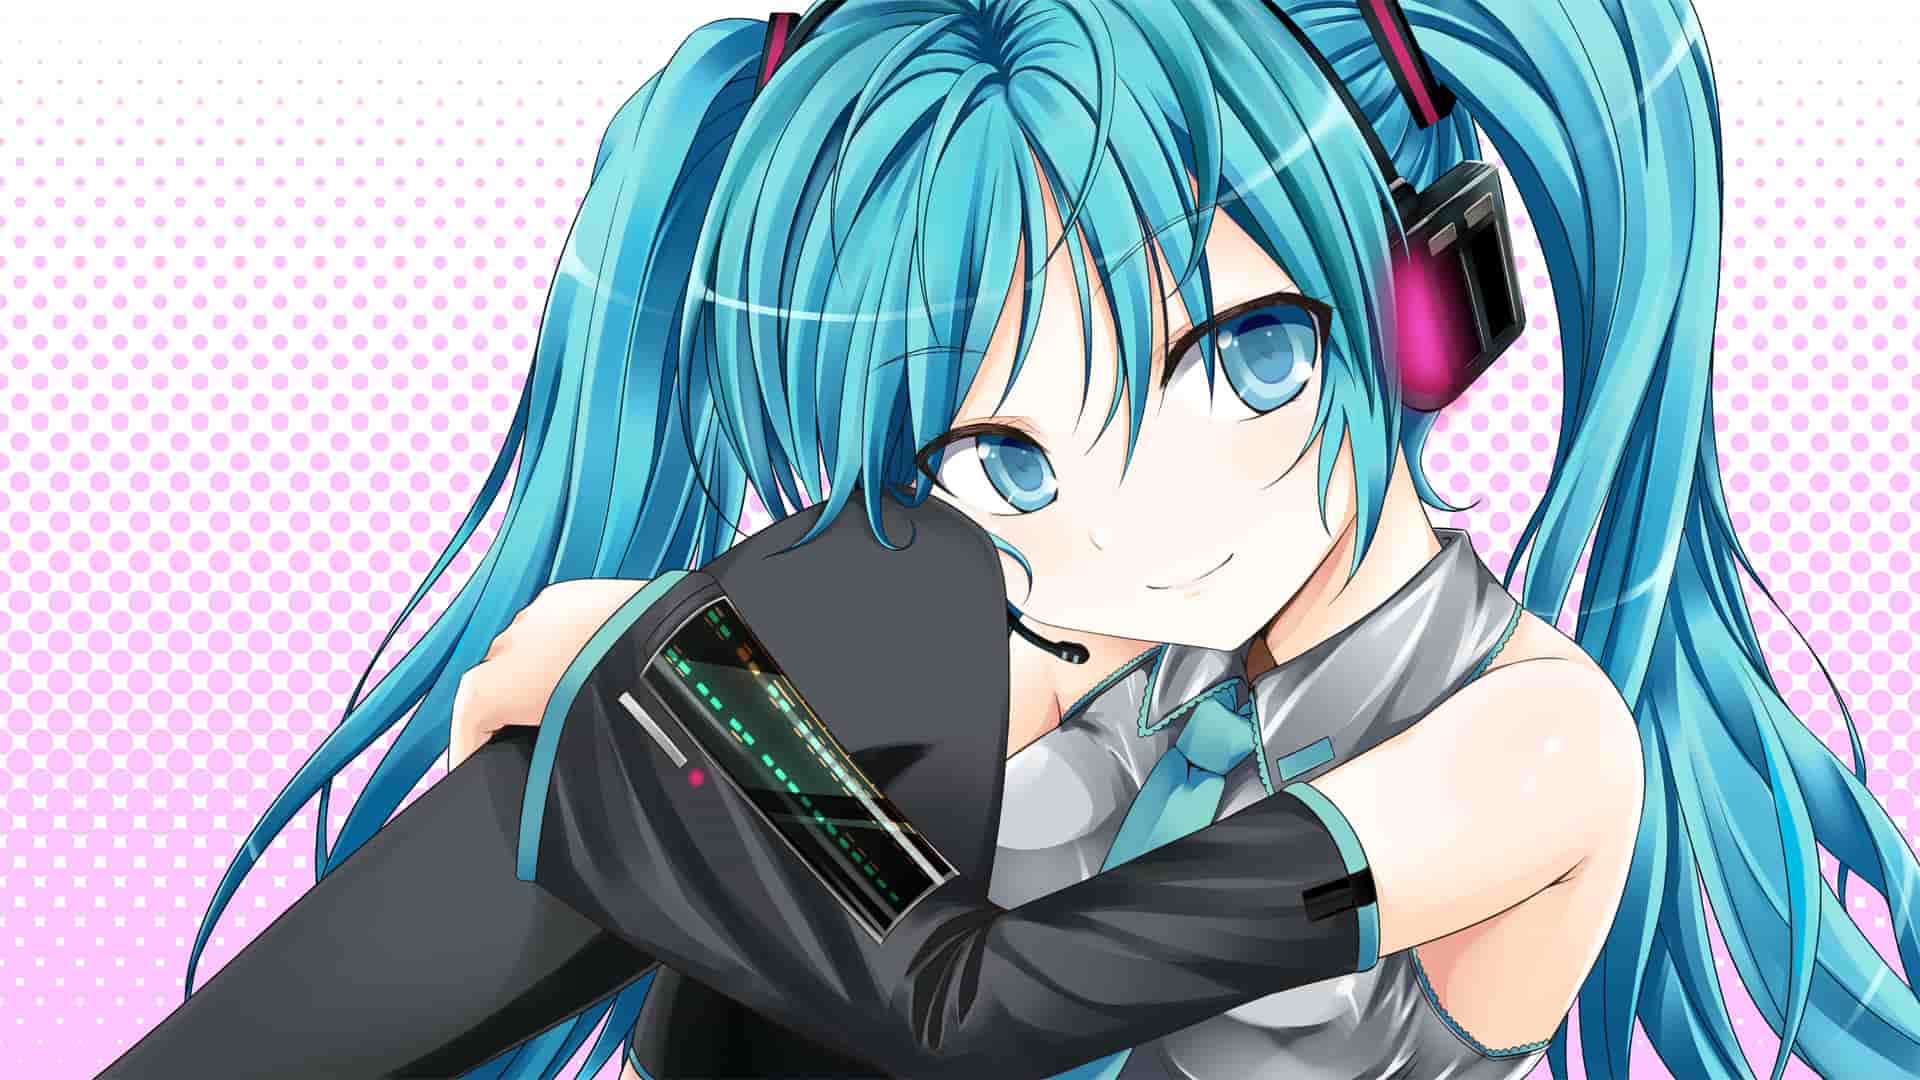 7. "Blue-haired girl" by Vocaloid (song featuring a blue-haired girl) - wide 7